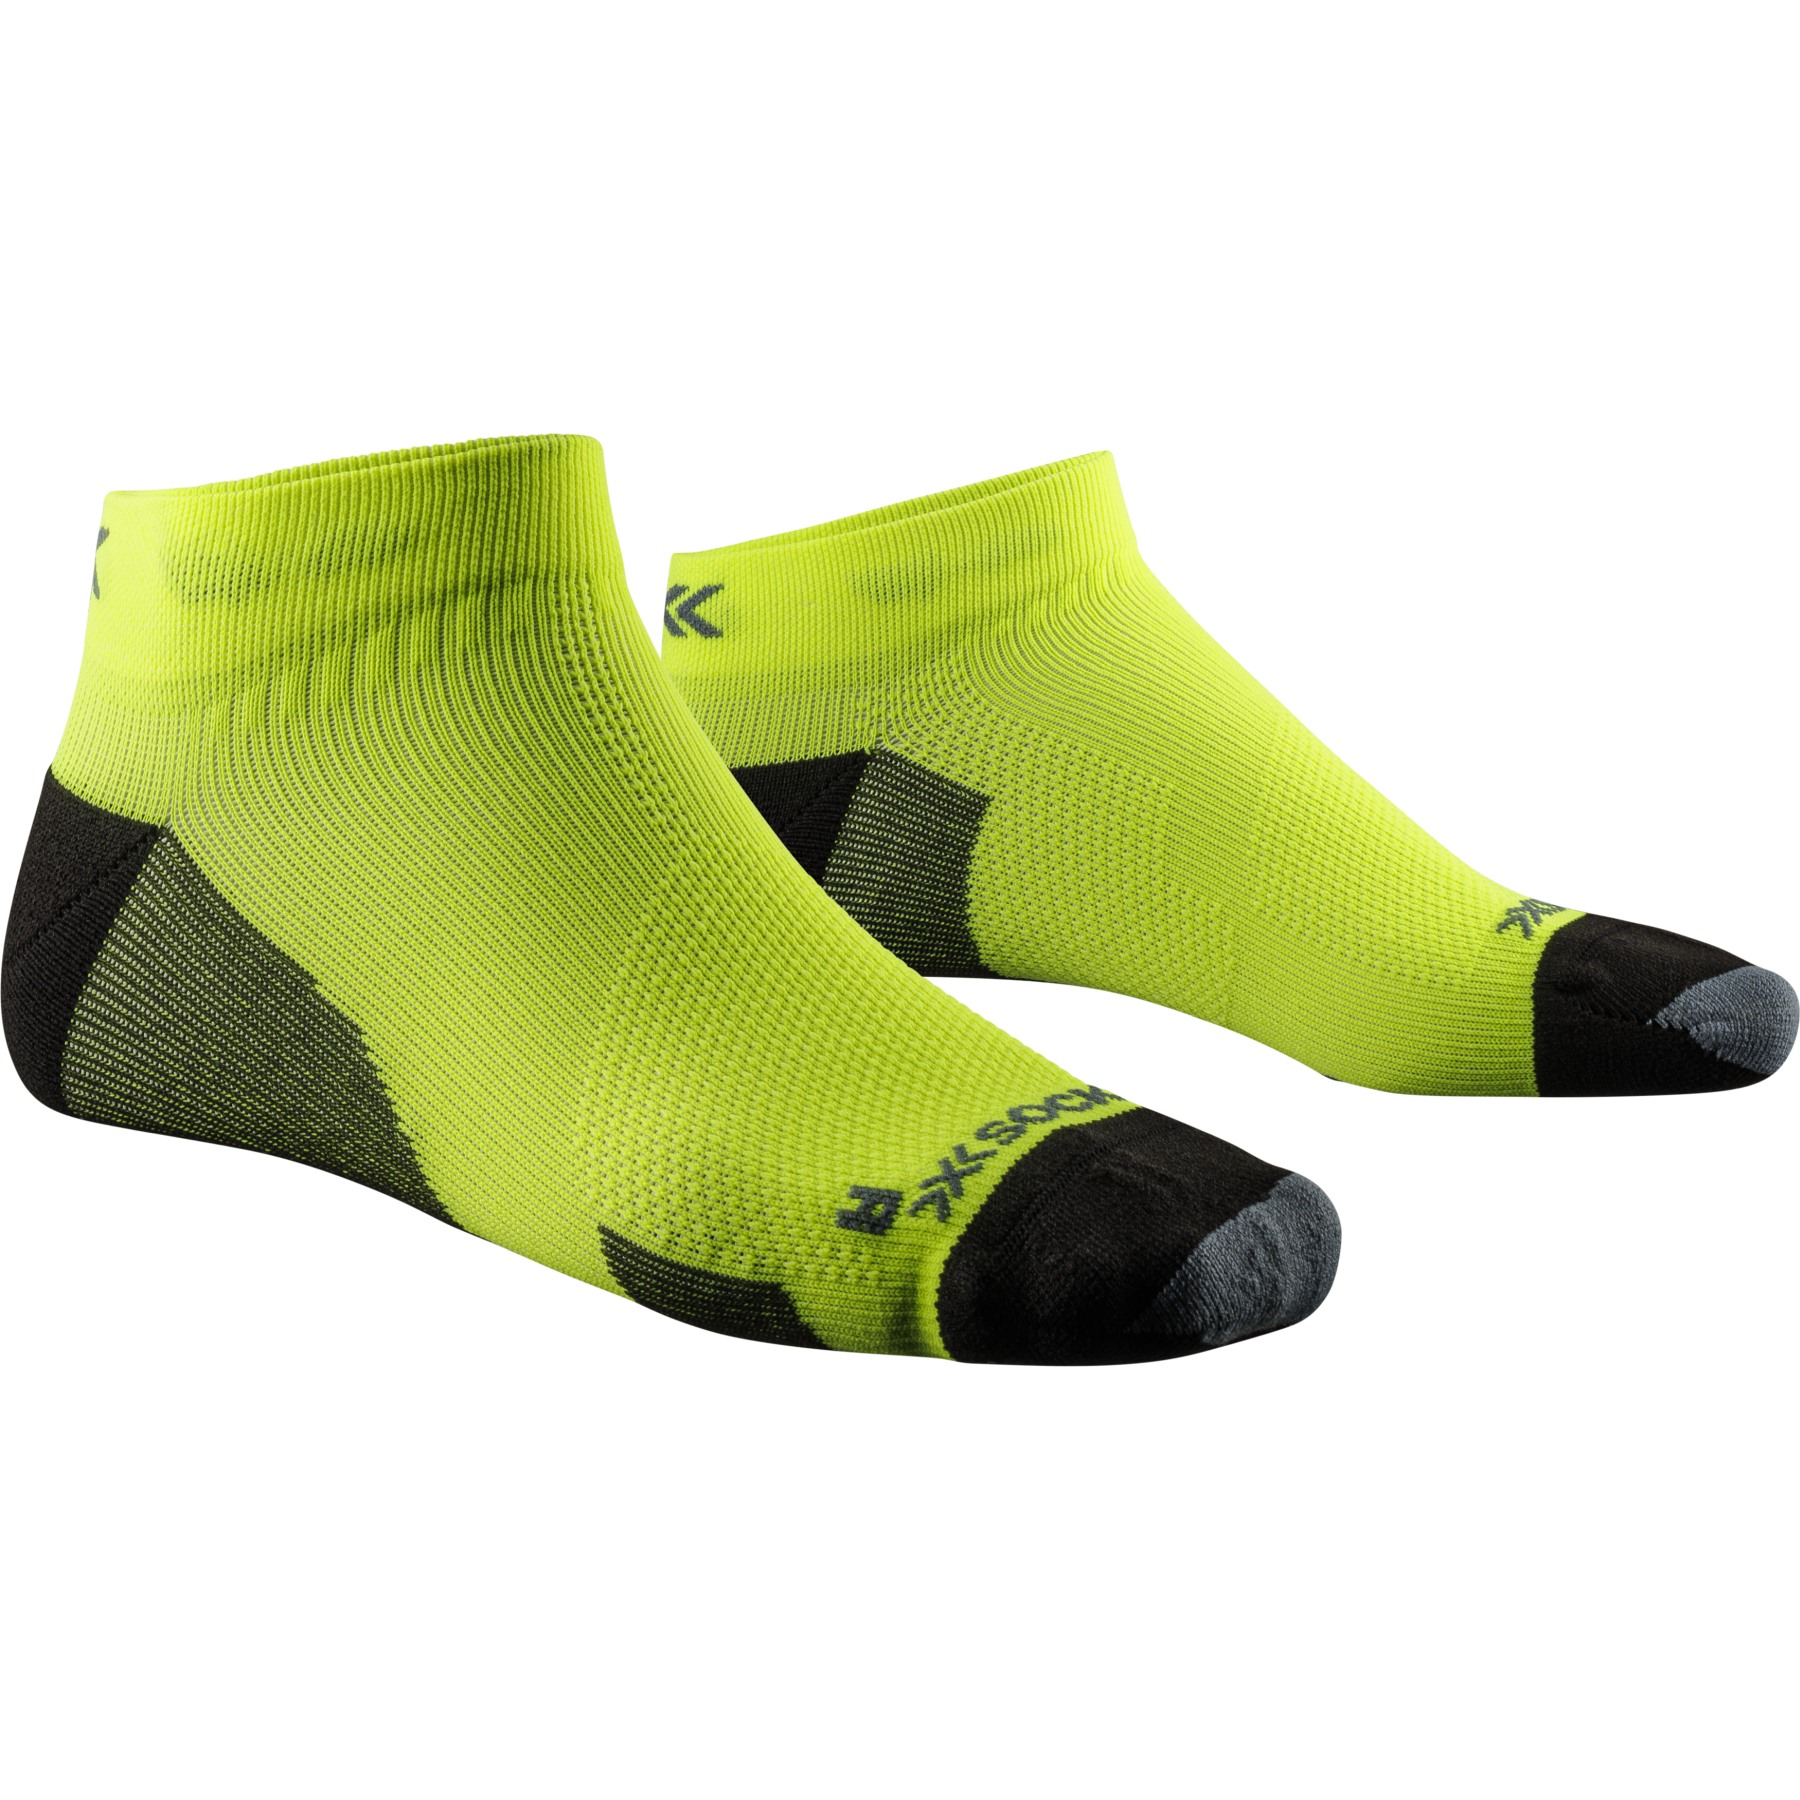 Picture of X-Socks Run Discover Low Cut Socks - fluo yellow/opal black